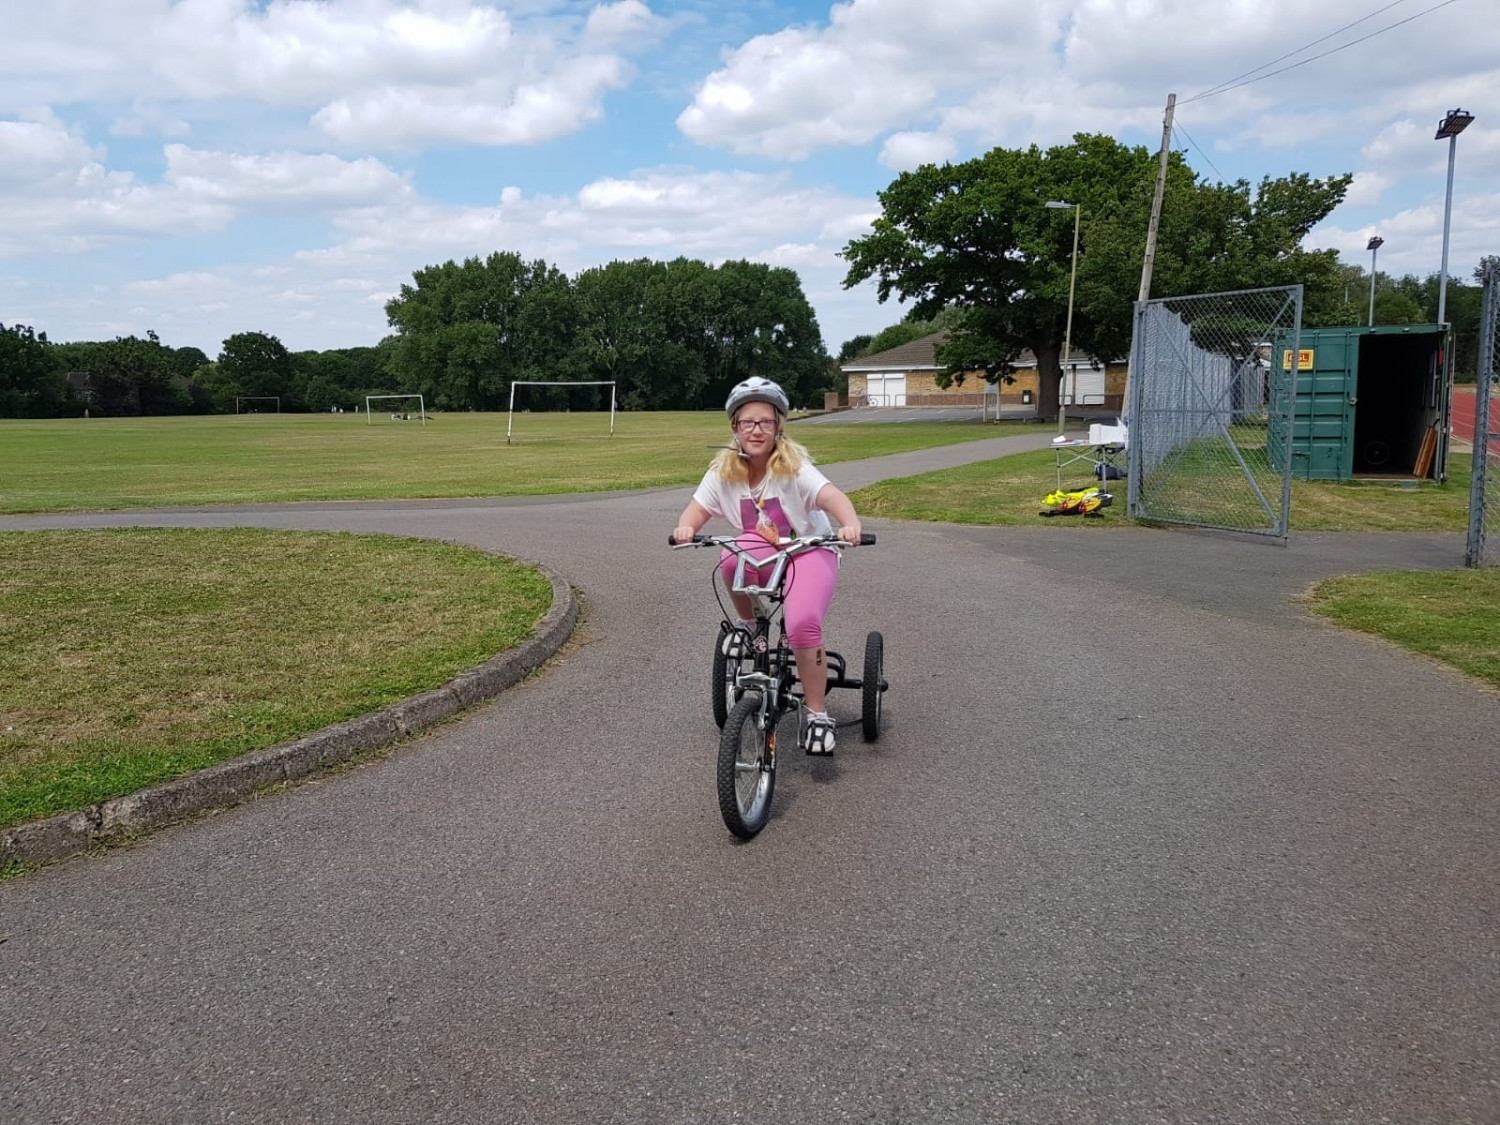 Riding adapted bicycles